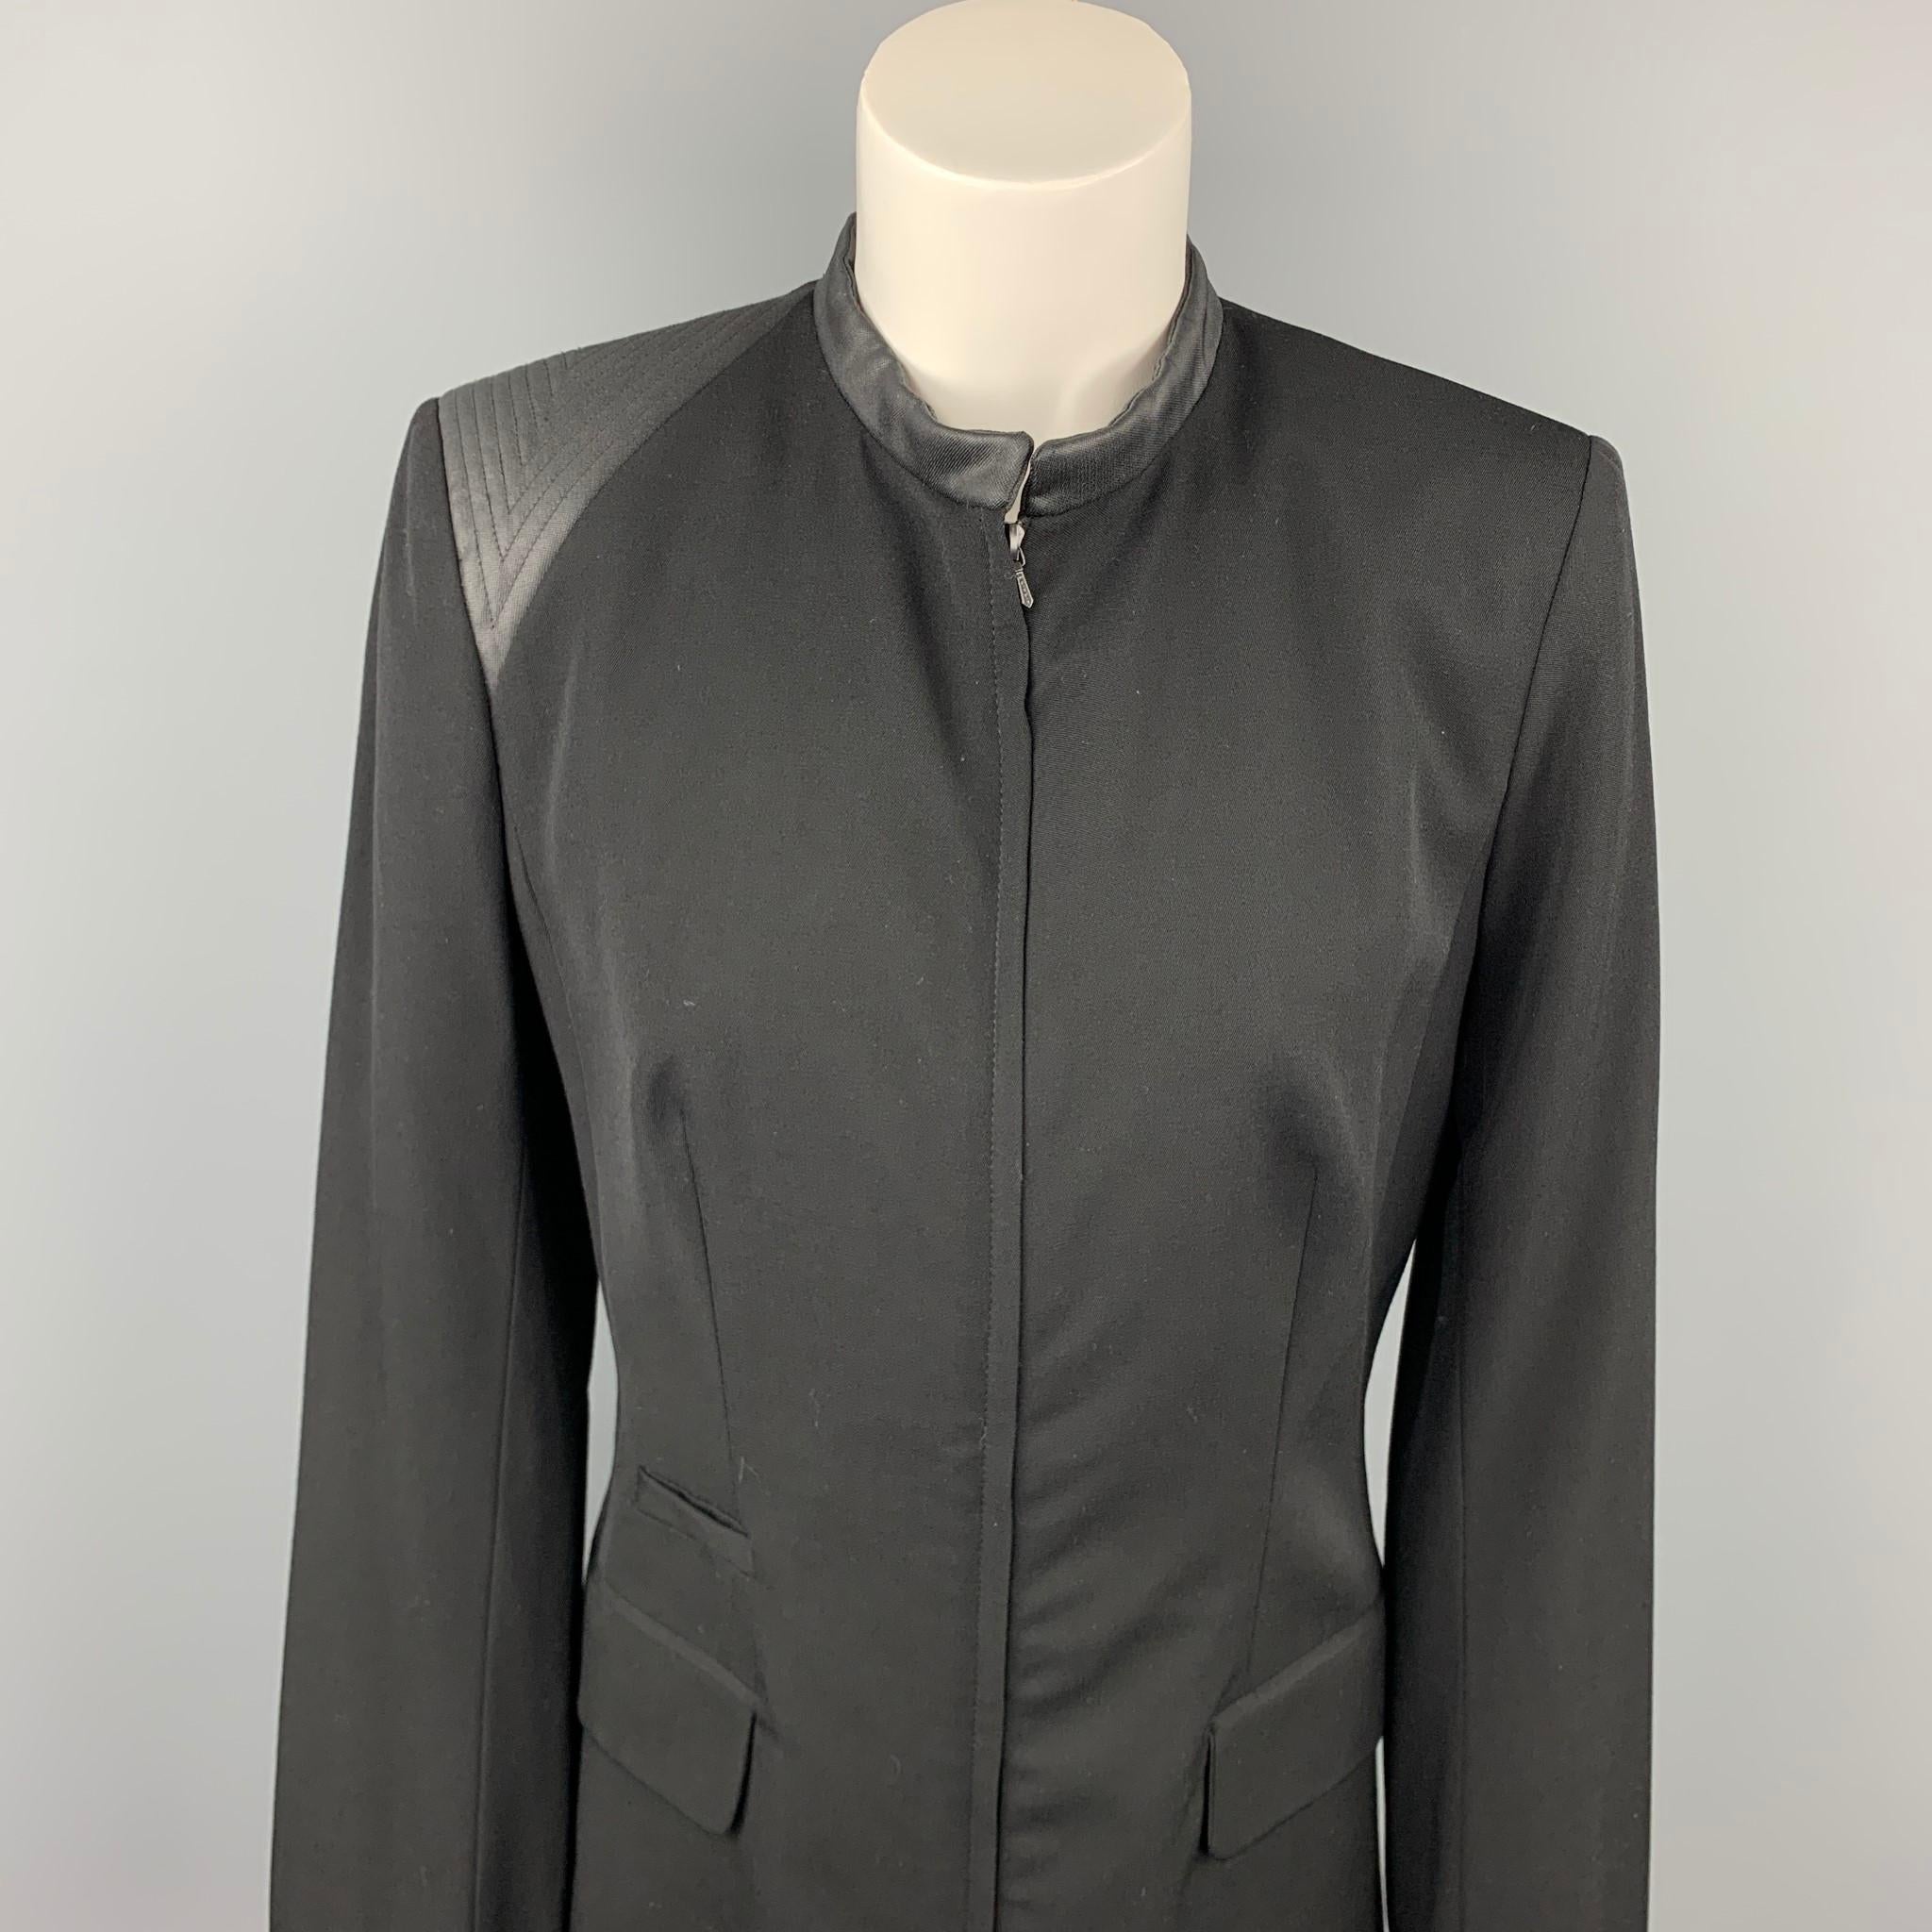 CLAUDE MONTANA jacket comes in a black two toned wool / silk featuring a ribbed hem, shoulder pads, flap pockets, and a zip up closure. Made in Italy.

Very Good Pre-Owned Condition.
Marked: IT 40

Measurements:

Shoulder: 15.5 in. 
Bust: 35 in.